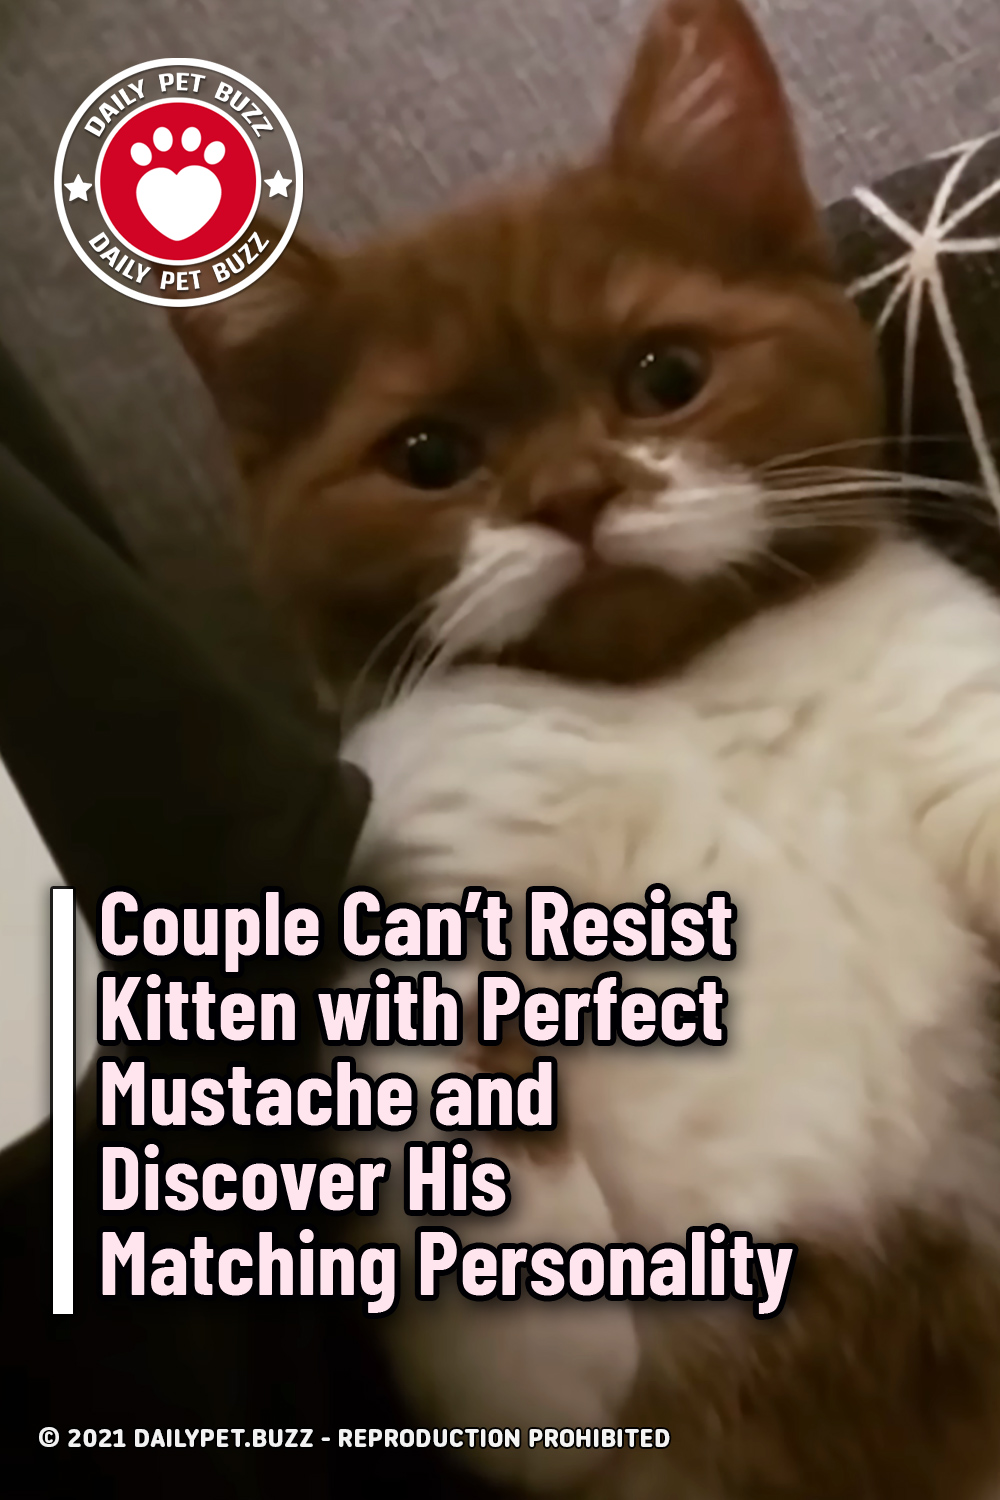 Couple Can’t Resist Kitten with Perfect Mustache and Discover His Matching Personality